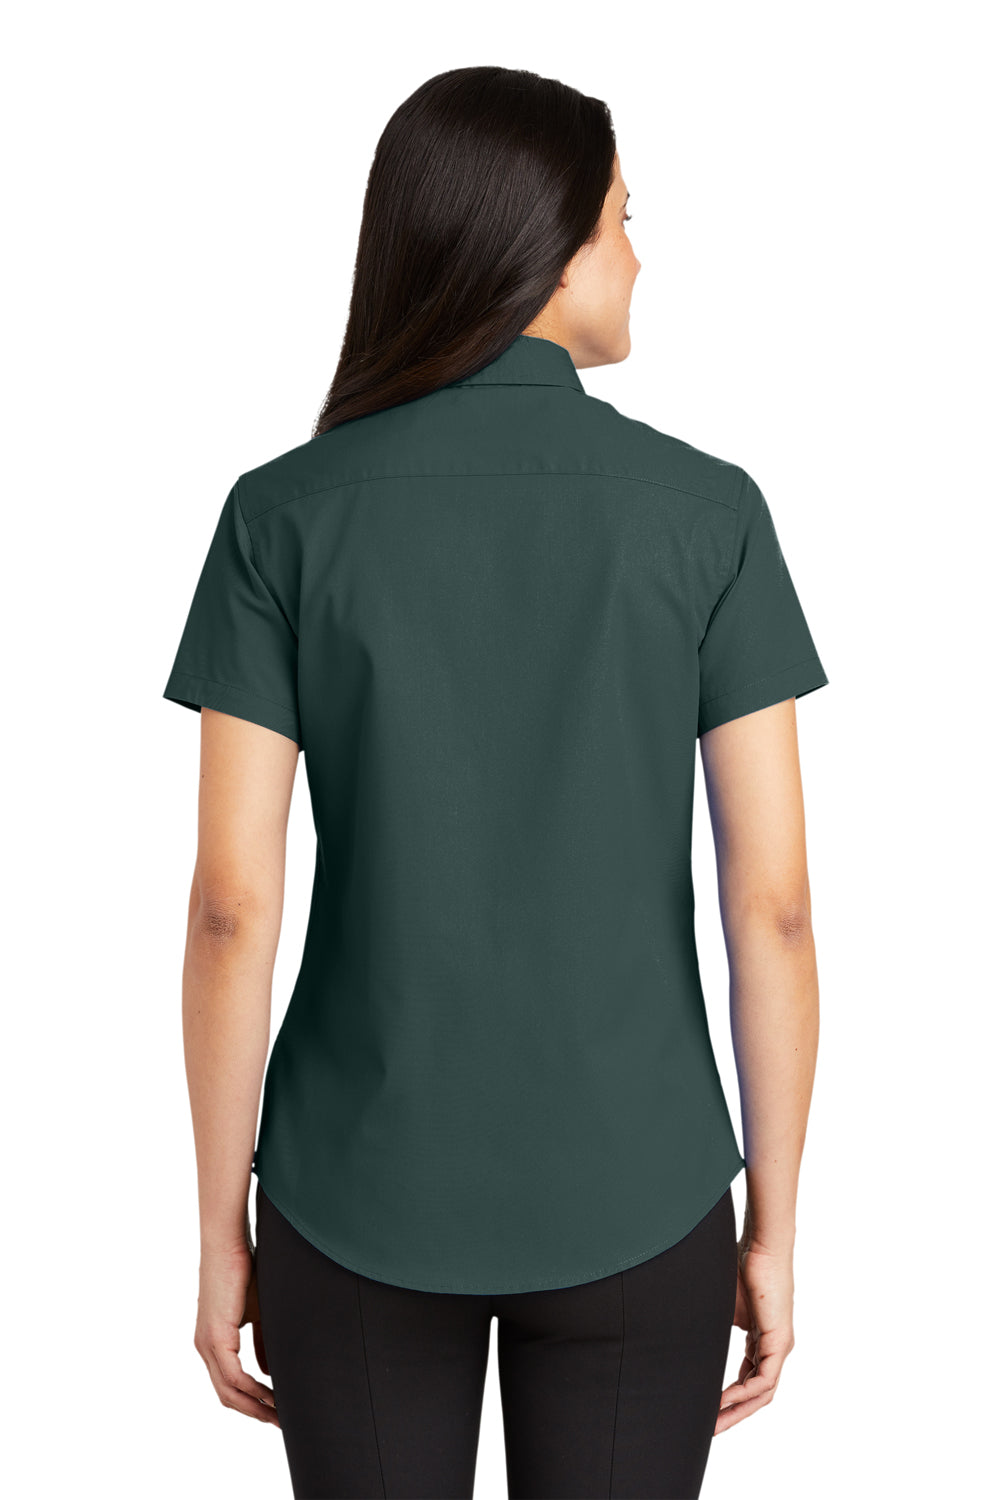 Port Authority L508 Womens Easy Care Wrinkle Resistant Short Sleeve Button Down Shirt Dark Green Back